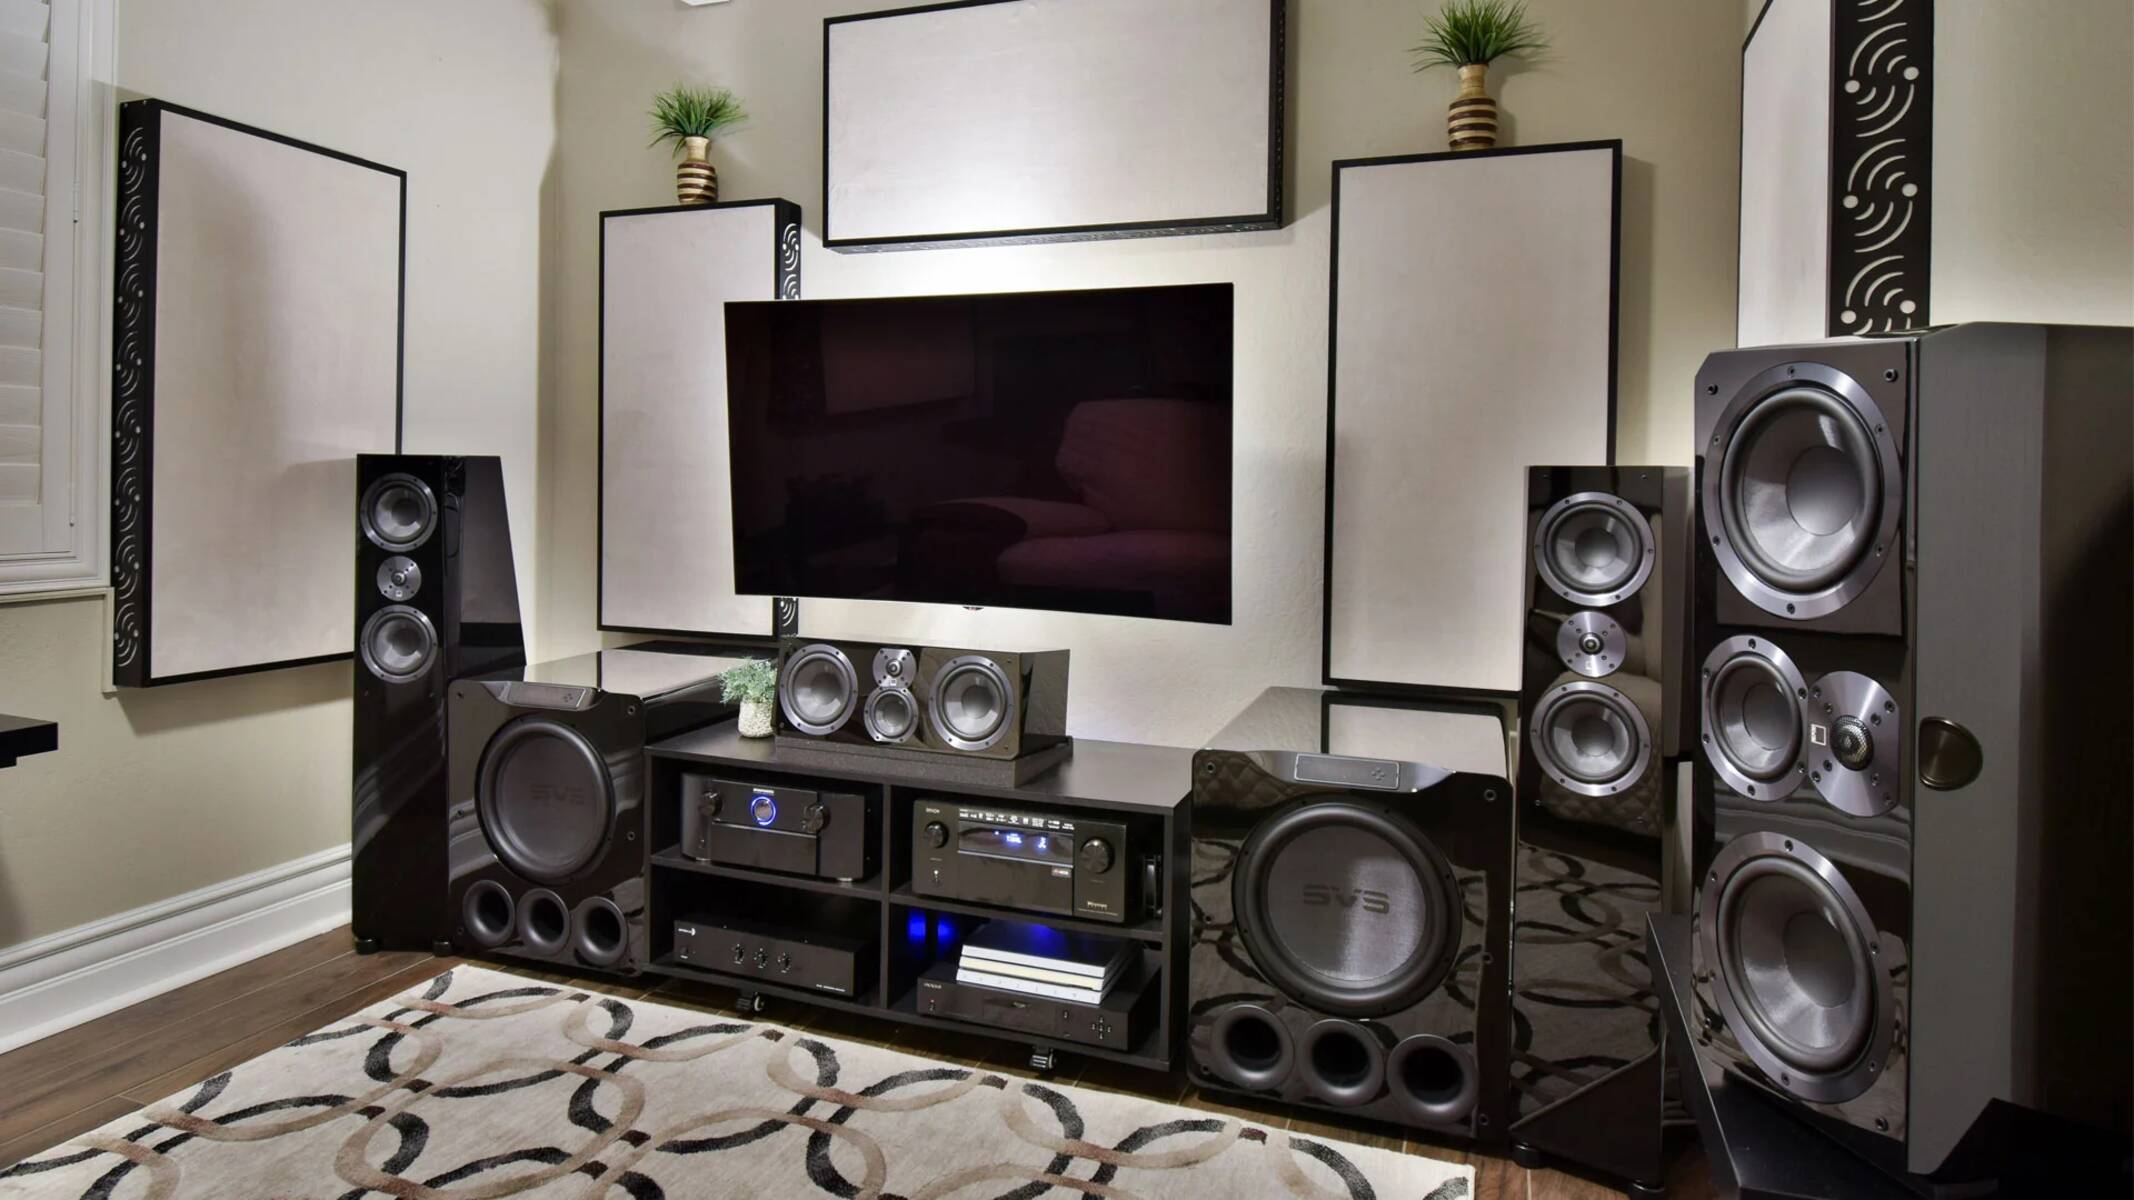 How To Hook Up RCA Surround Sound System